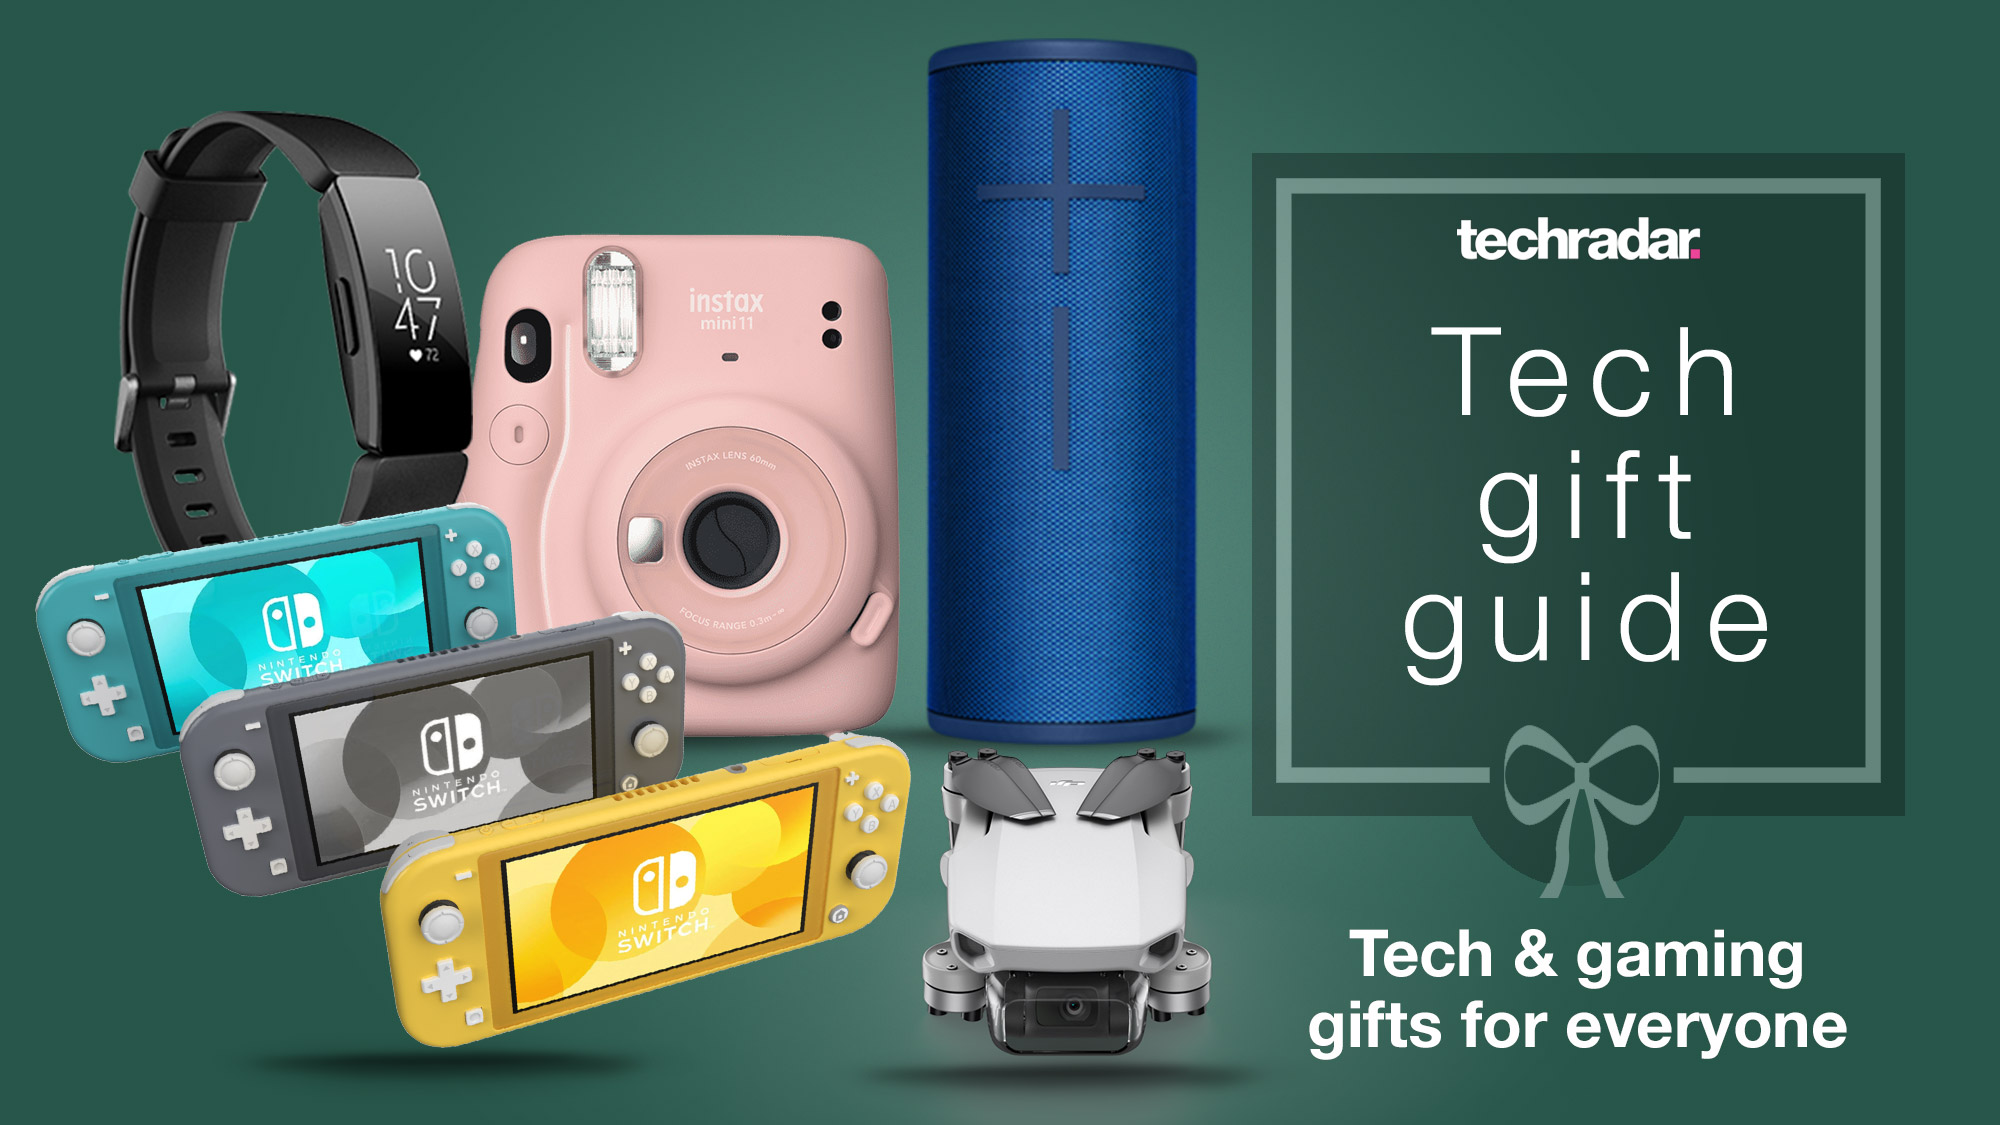 10 of the best Electronic Gift Ideas for her - everything from